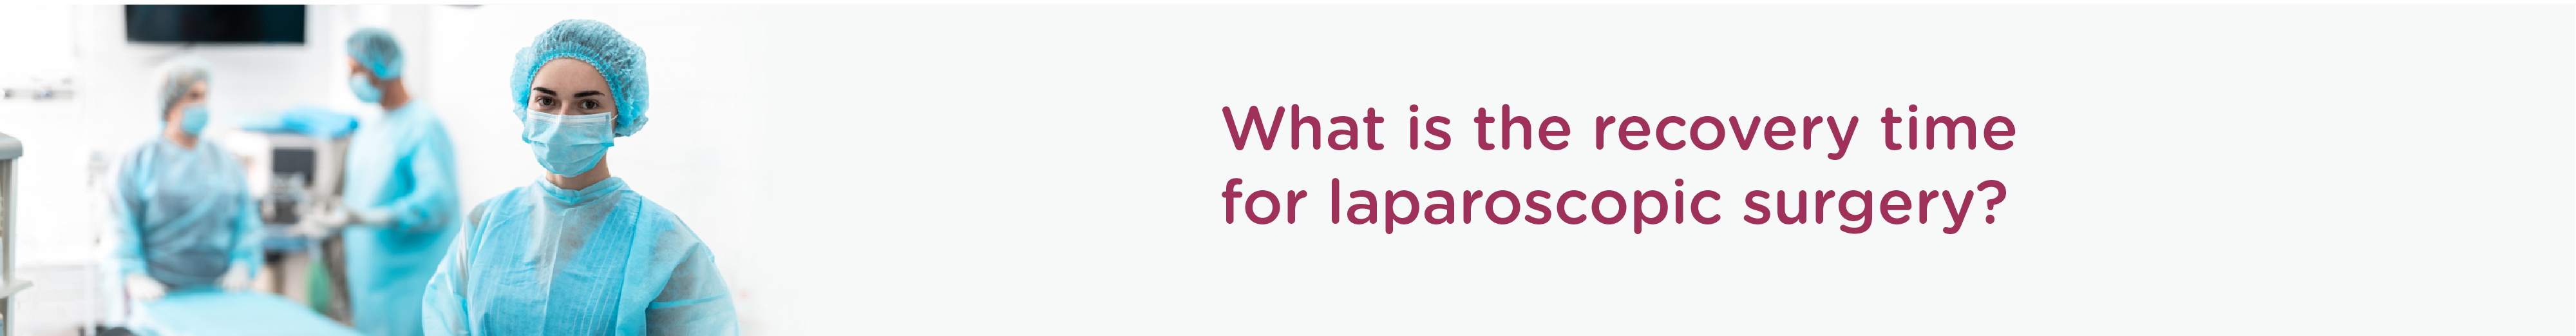 What is the recovery time for laparoscopic surgery?